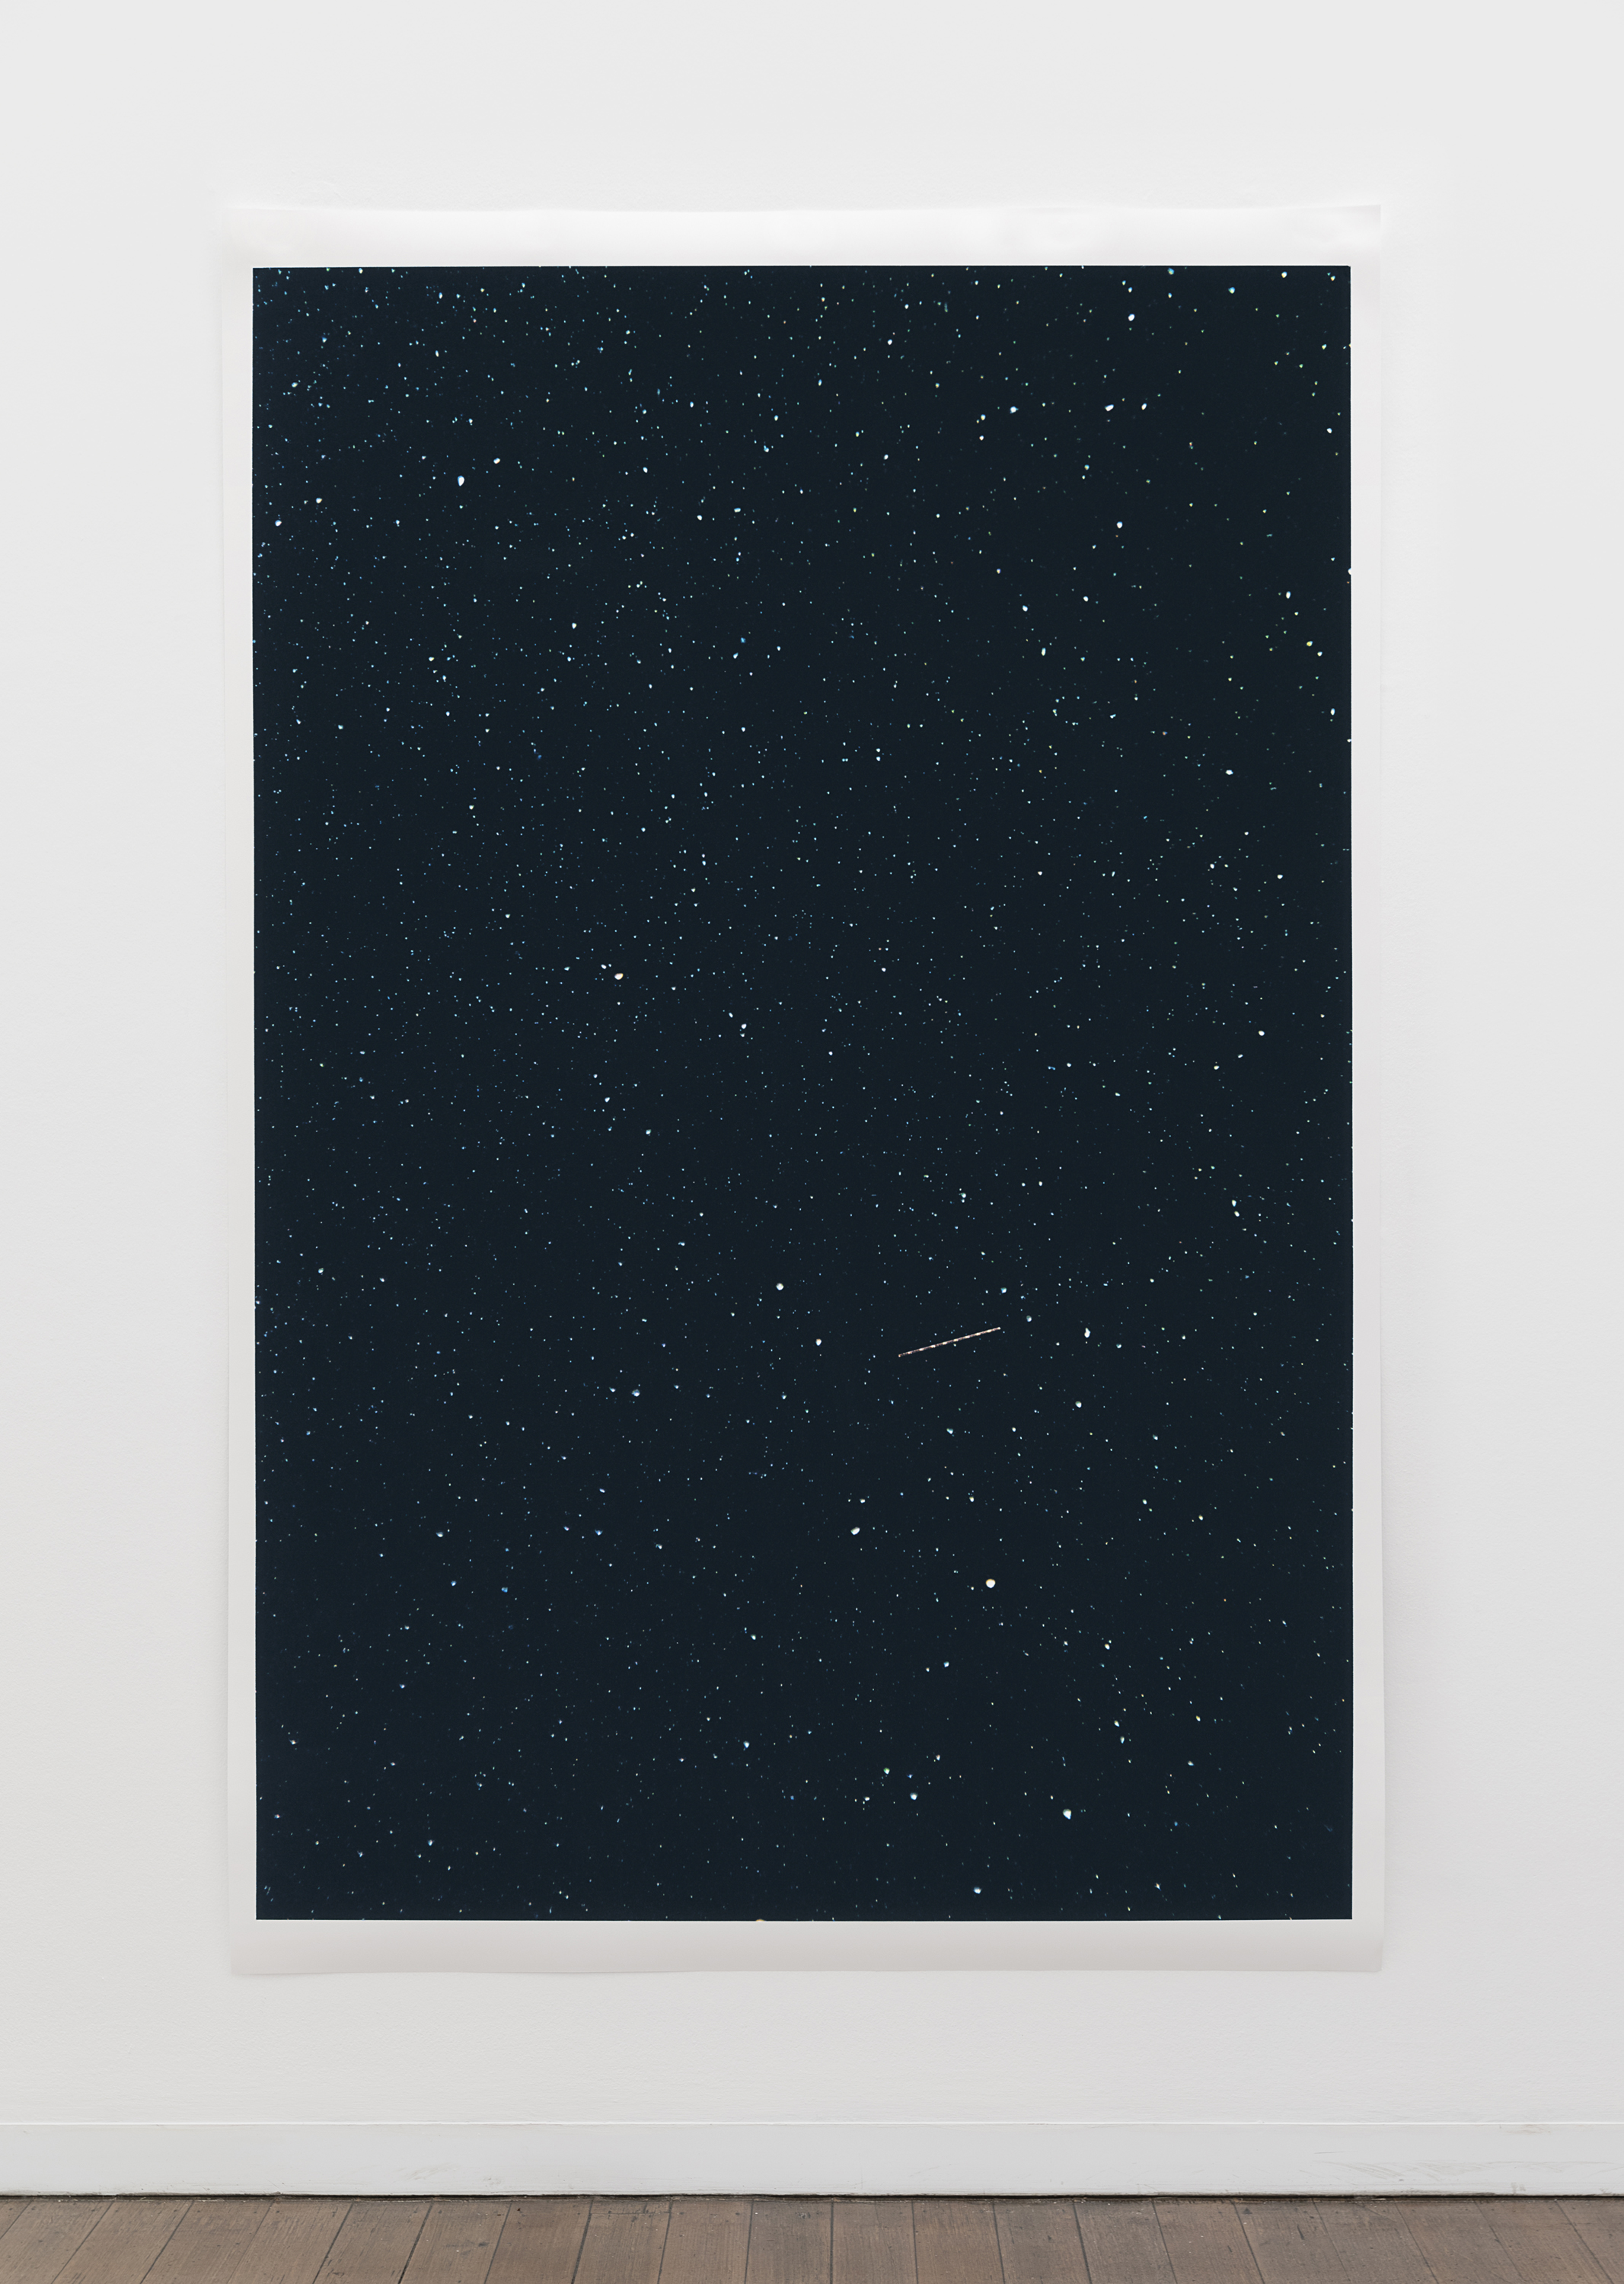   Untitled (navigation lights, stars / 13 seconds)  ,  pigment print on paper, sheet: 229.6 × 150.5 cm (90 3/8 × 59 1/4 in), framed: 240.5 × 160.9 cm (94 6/8 × 63 3/8 in), 2019  Installation view of “the sacredness of something” at Arc One Gallery, M